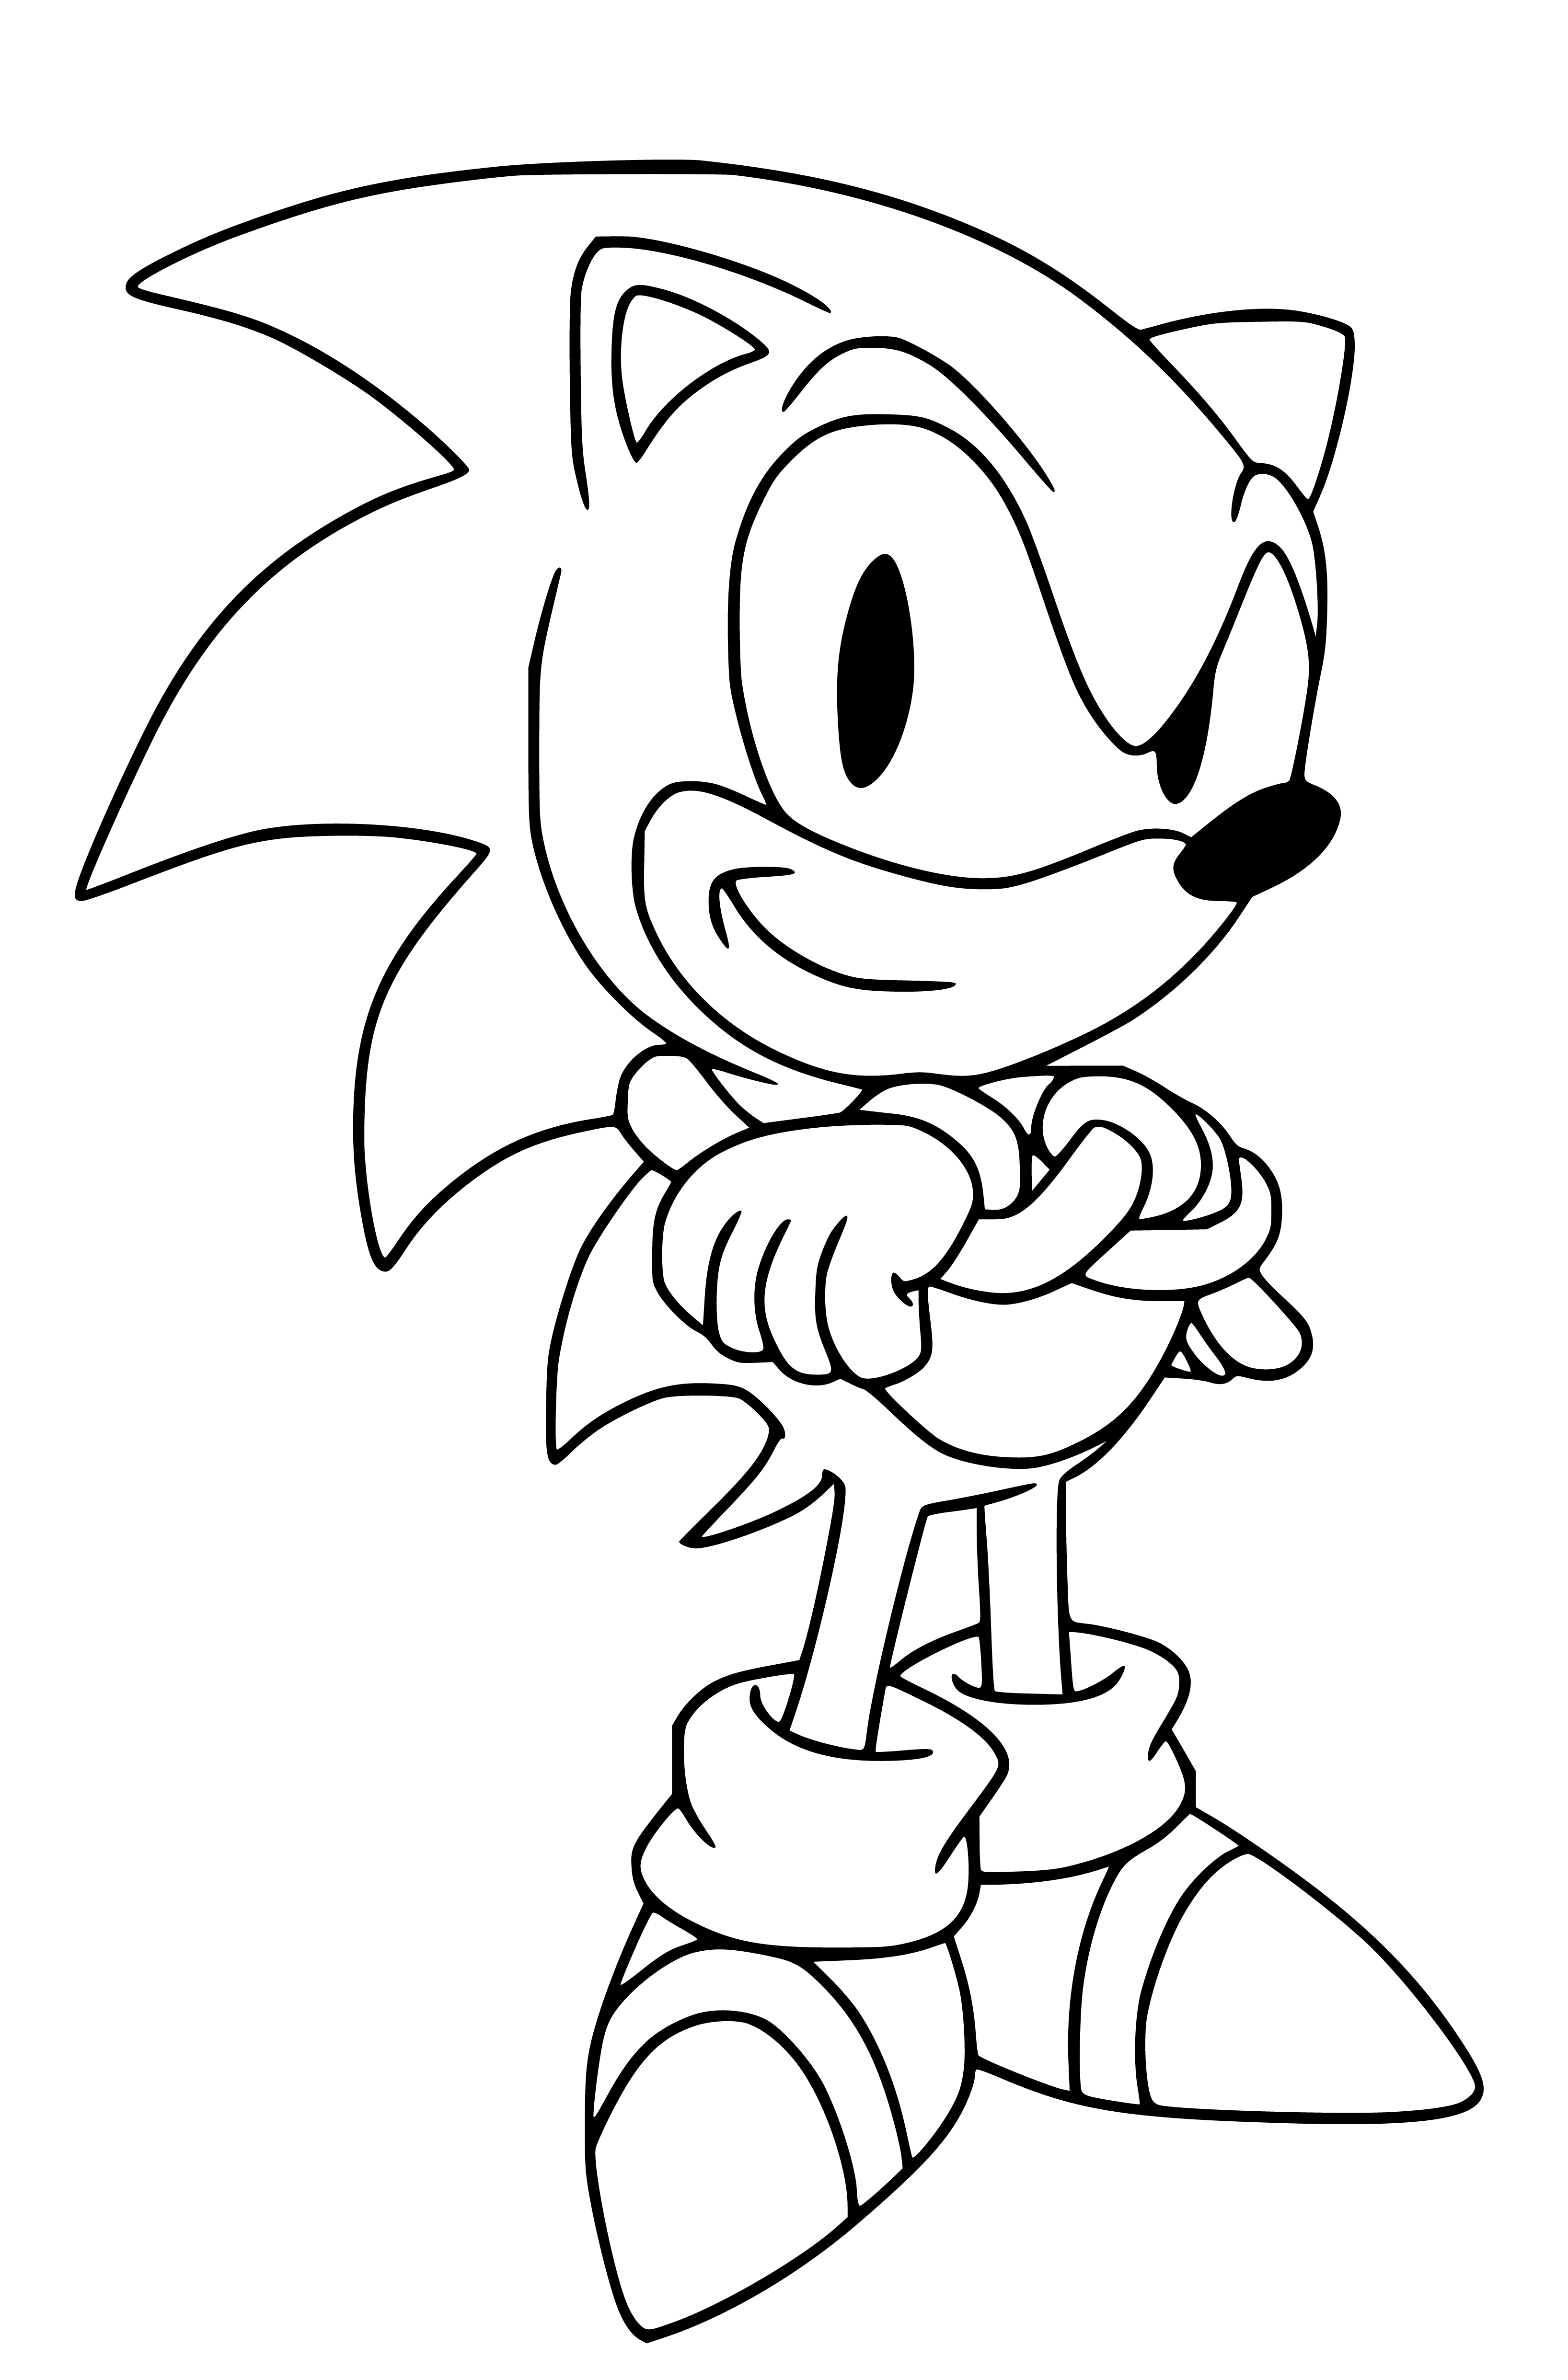 Sonic Simple Coloring Page for Children - SheetalColor.com